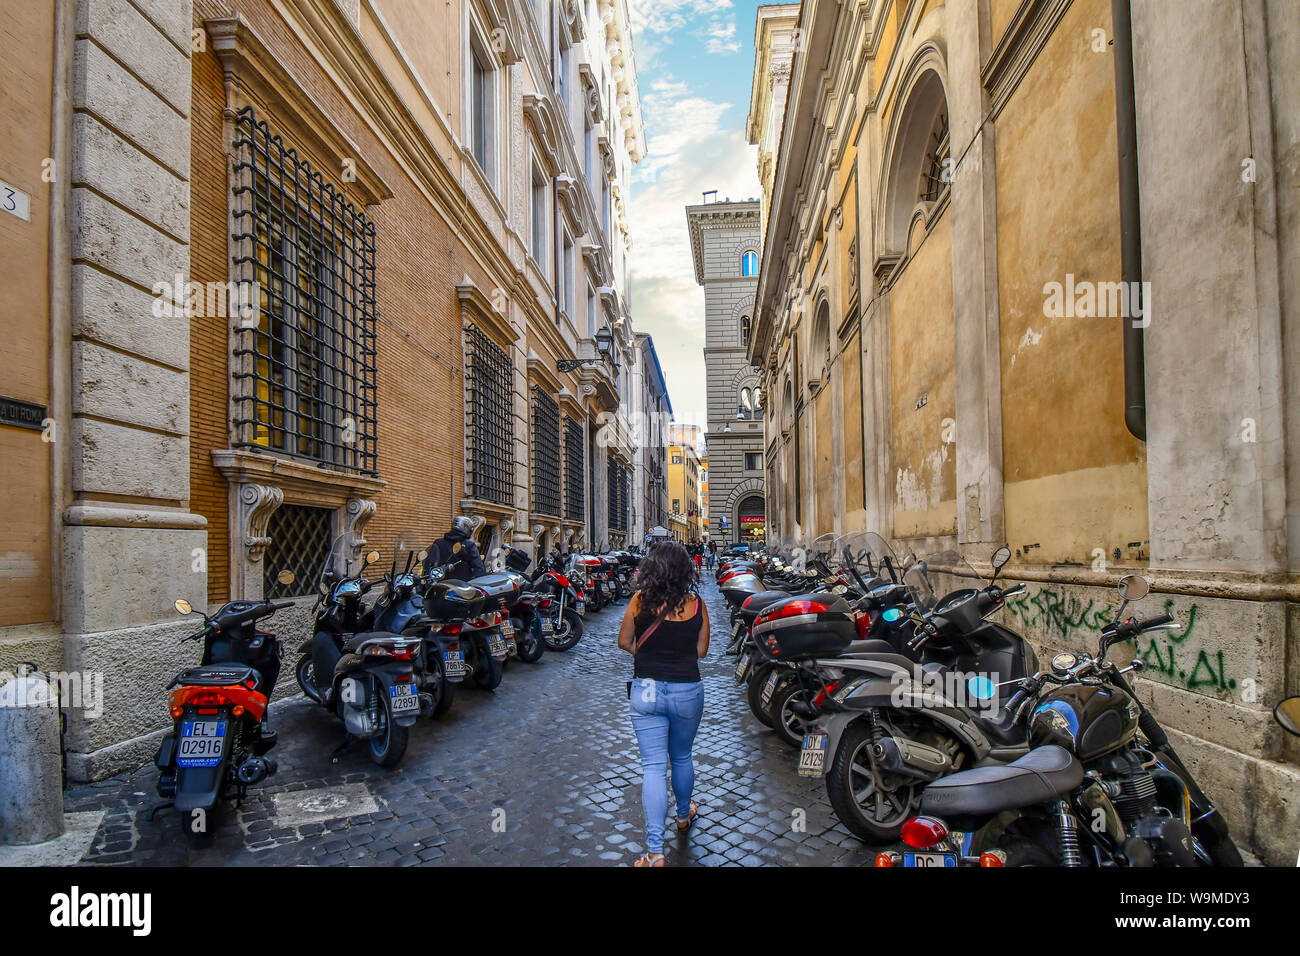 A woman walks alone down a narrow side street with many motorcycles parked on either side in the historic center of Rome, Italy Stock Photo